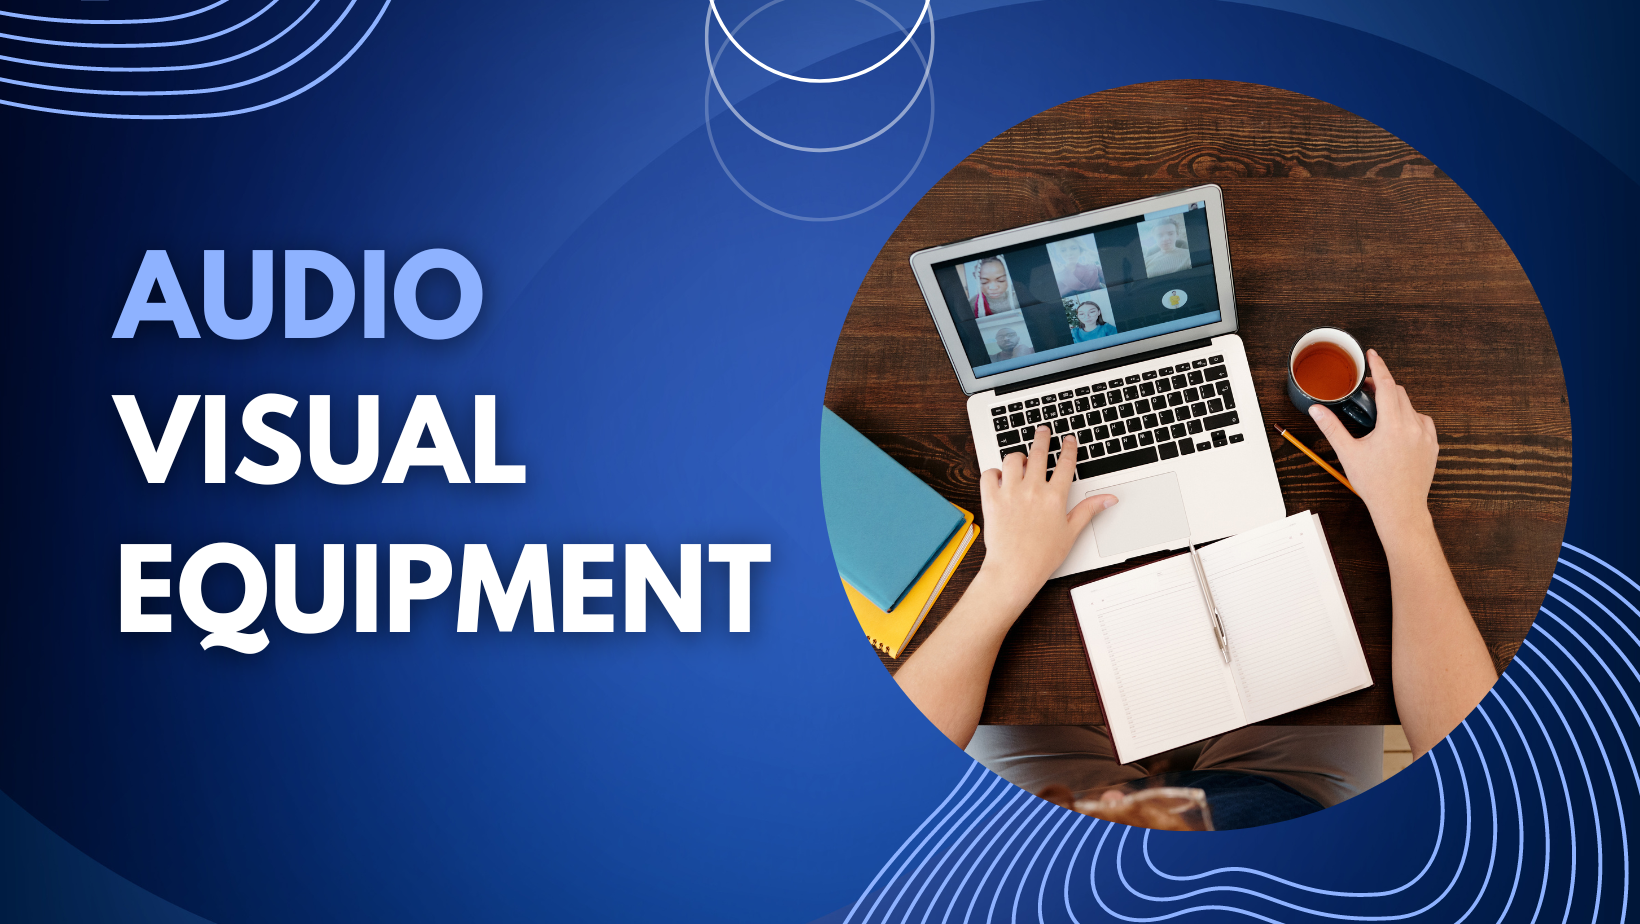 Quality Audio Visual Equipment Is The Key To Flawless Video Calls